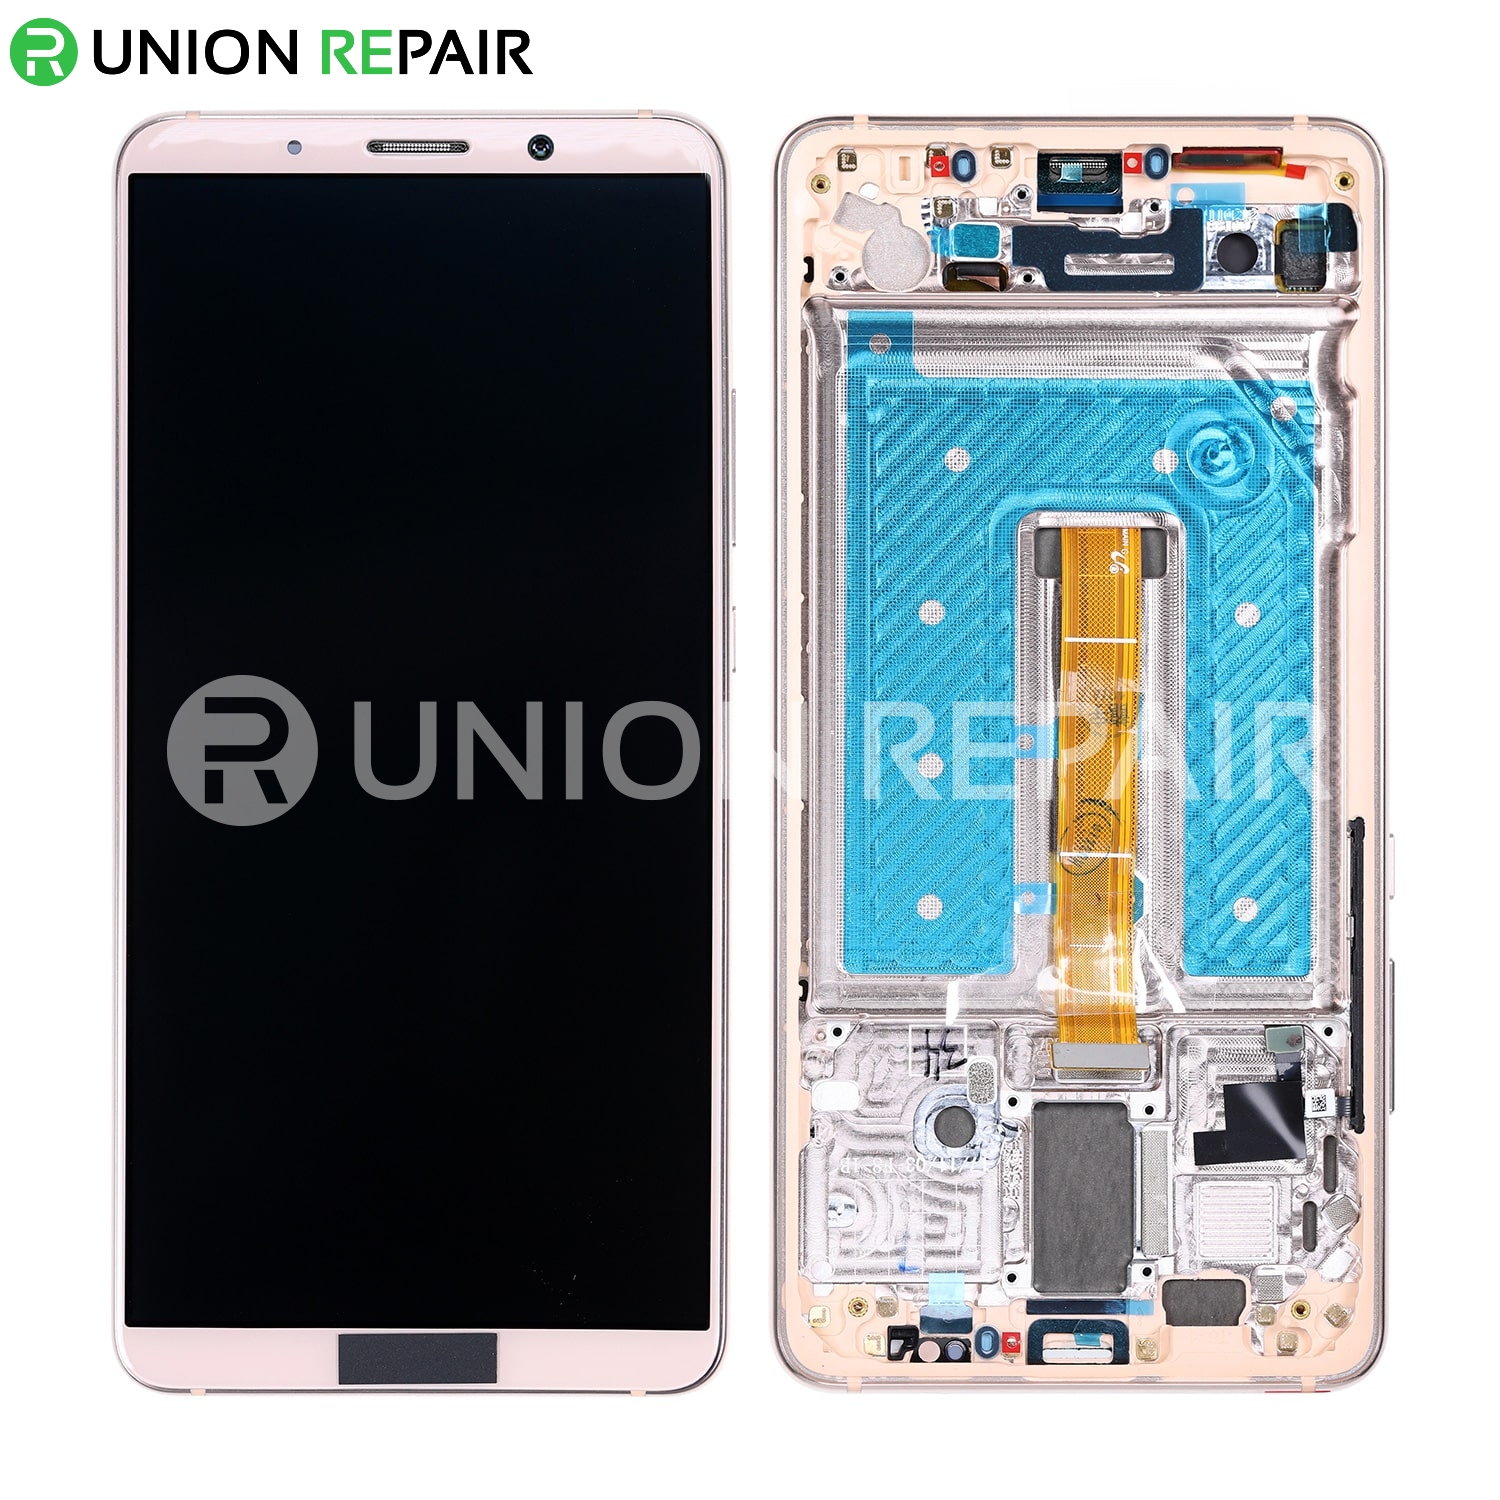 Replacement for Huawei Mate 10 Pro LCD Screen Digitizer Assembly with Frame - Pink Gold